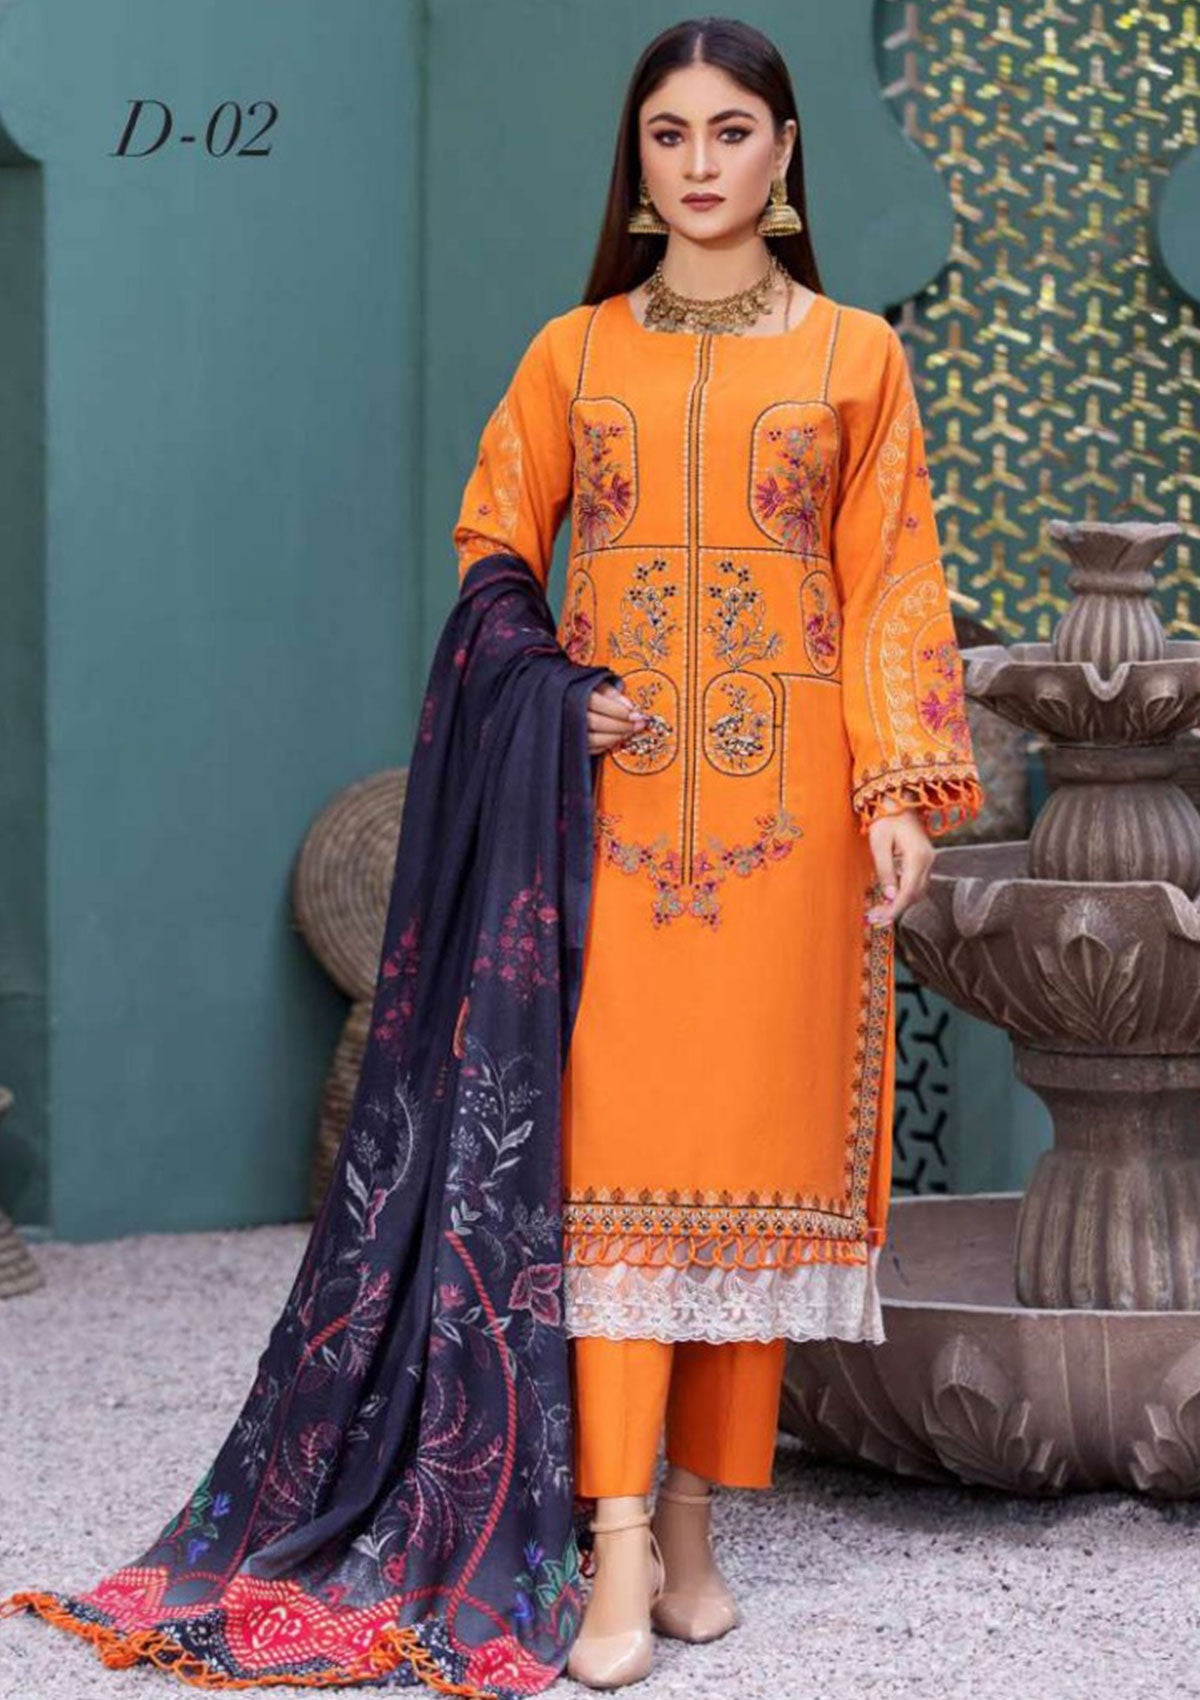 Winter Collection - Noor Jahan - Crimson - D#02 available at Saleem Fabrics Traditions